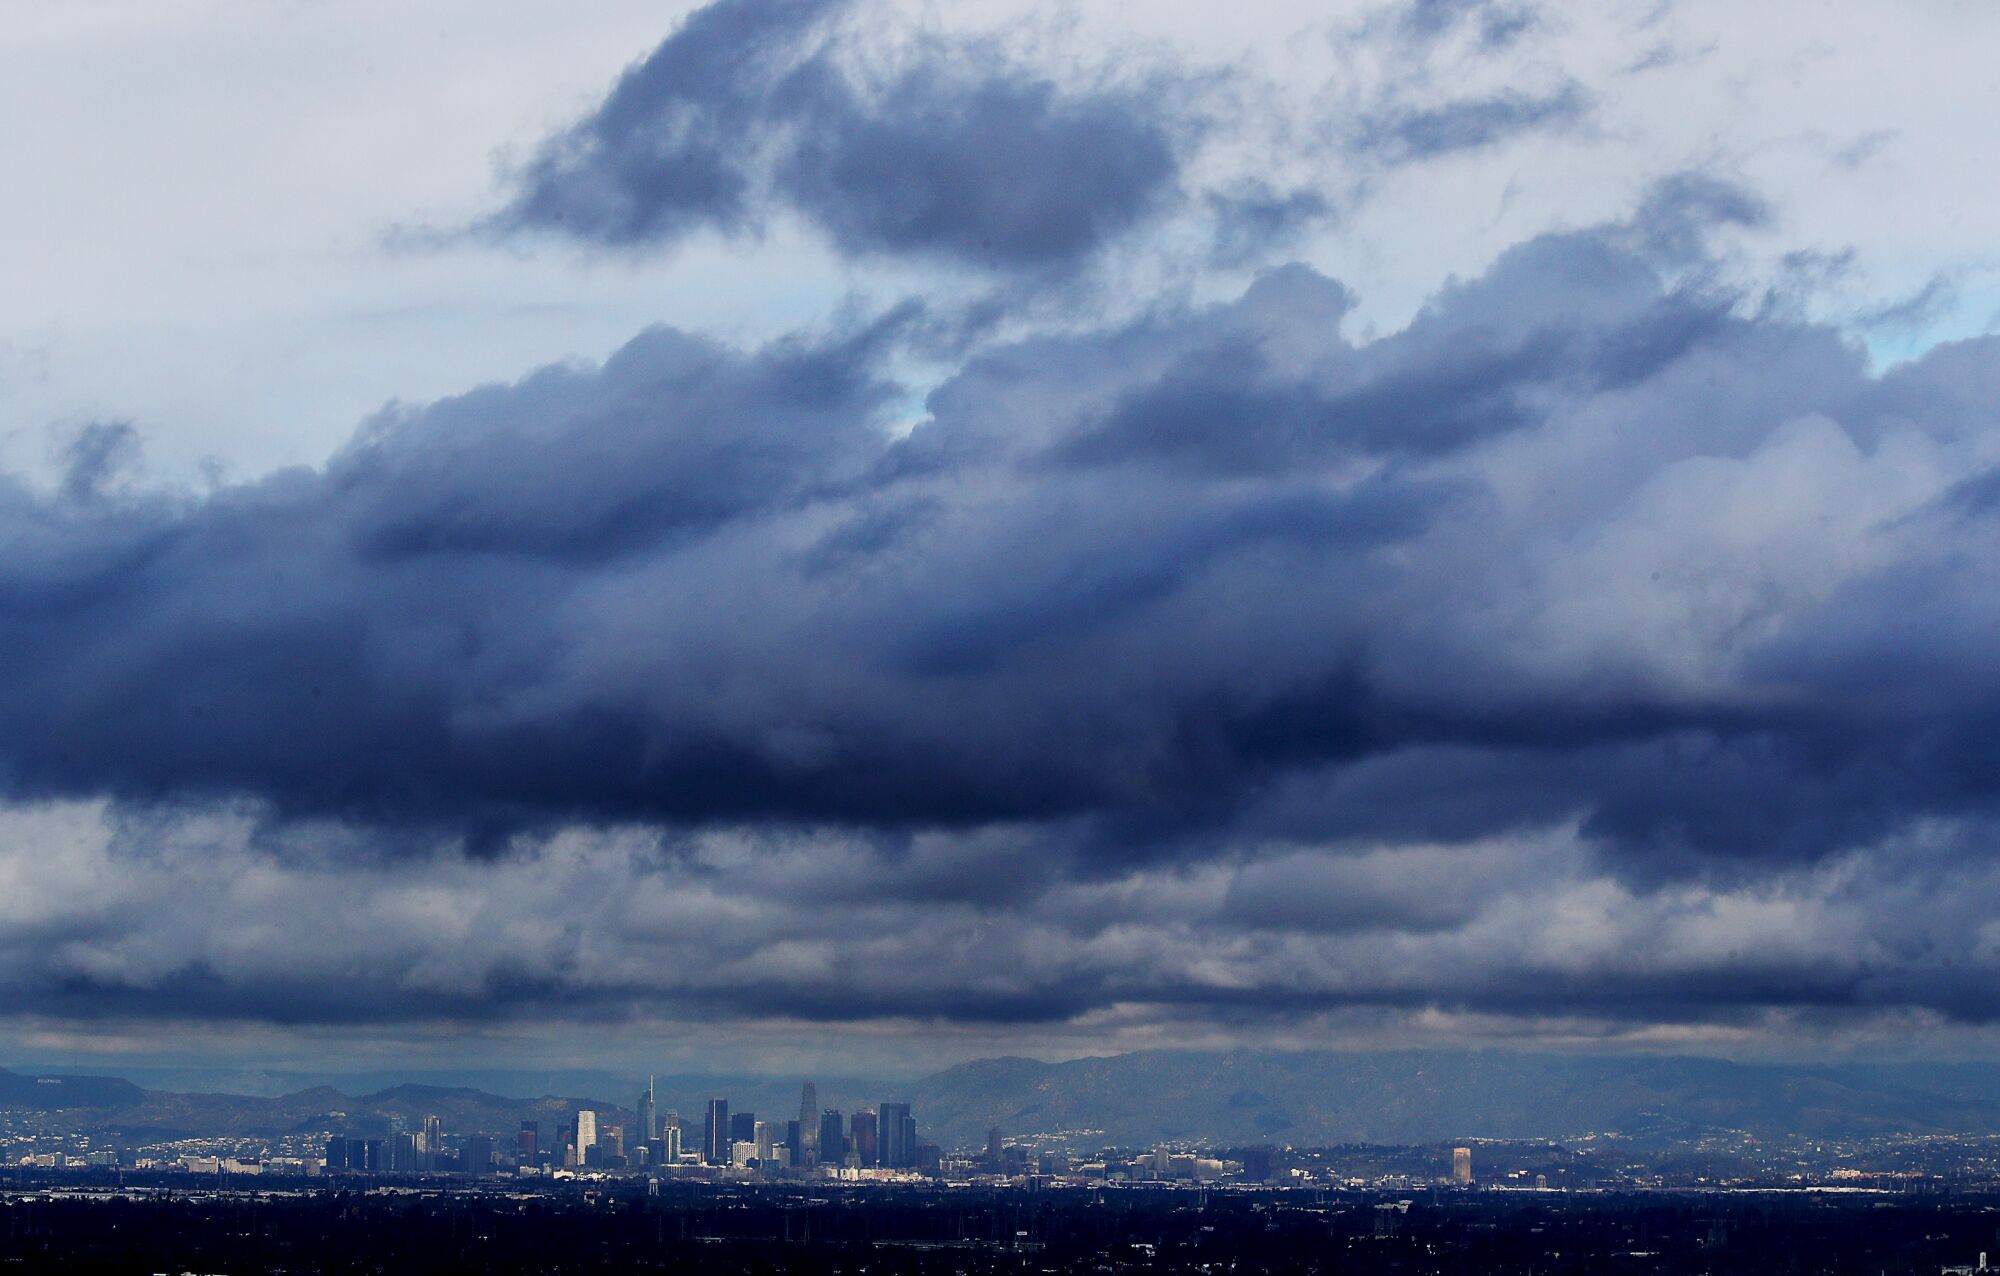 A December storm drifts over the Los Angeles Basin